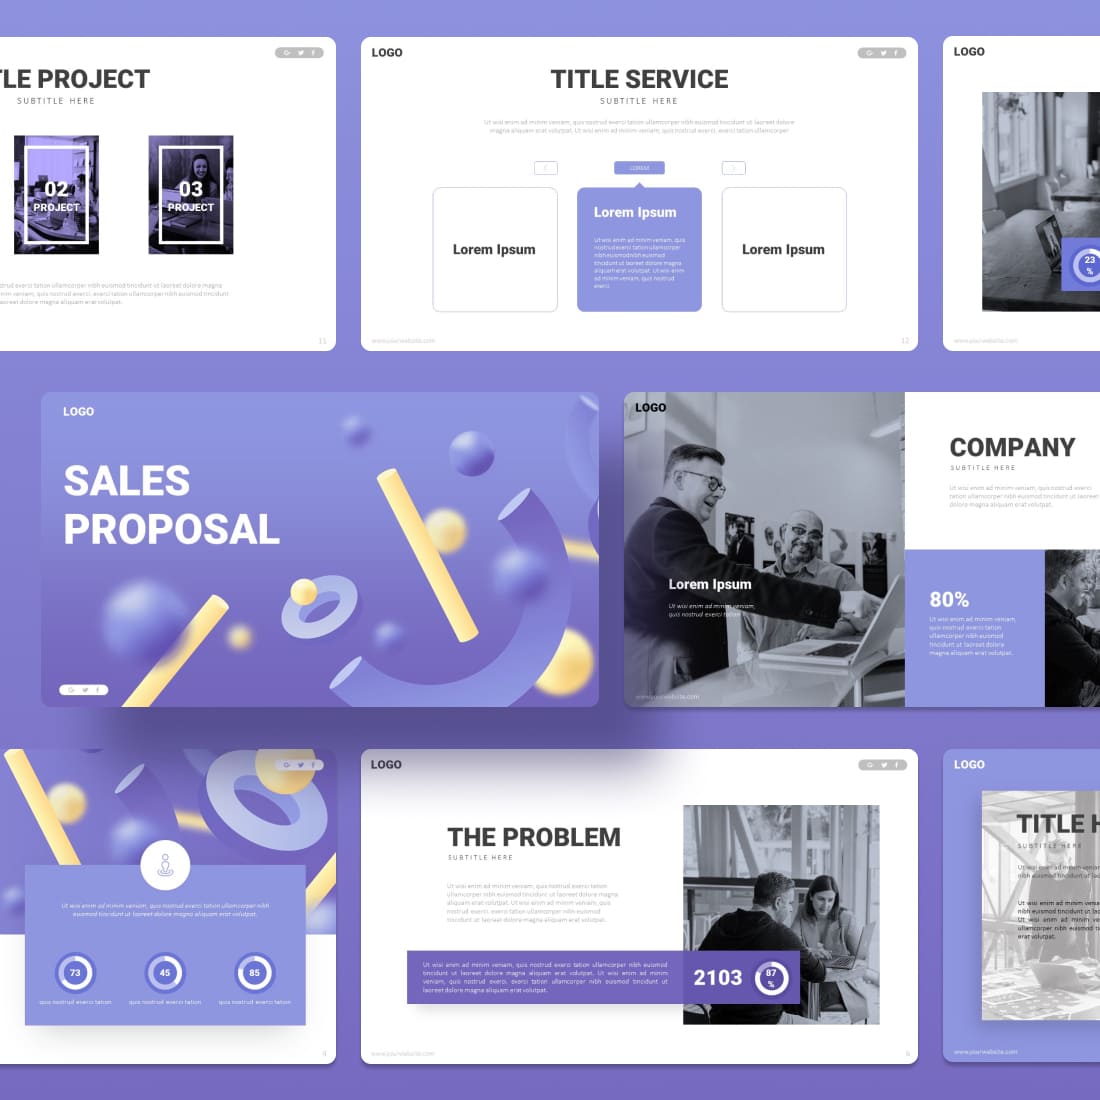 Sales Proposal Pitch Deck Presentation Template cover.